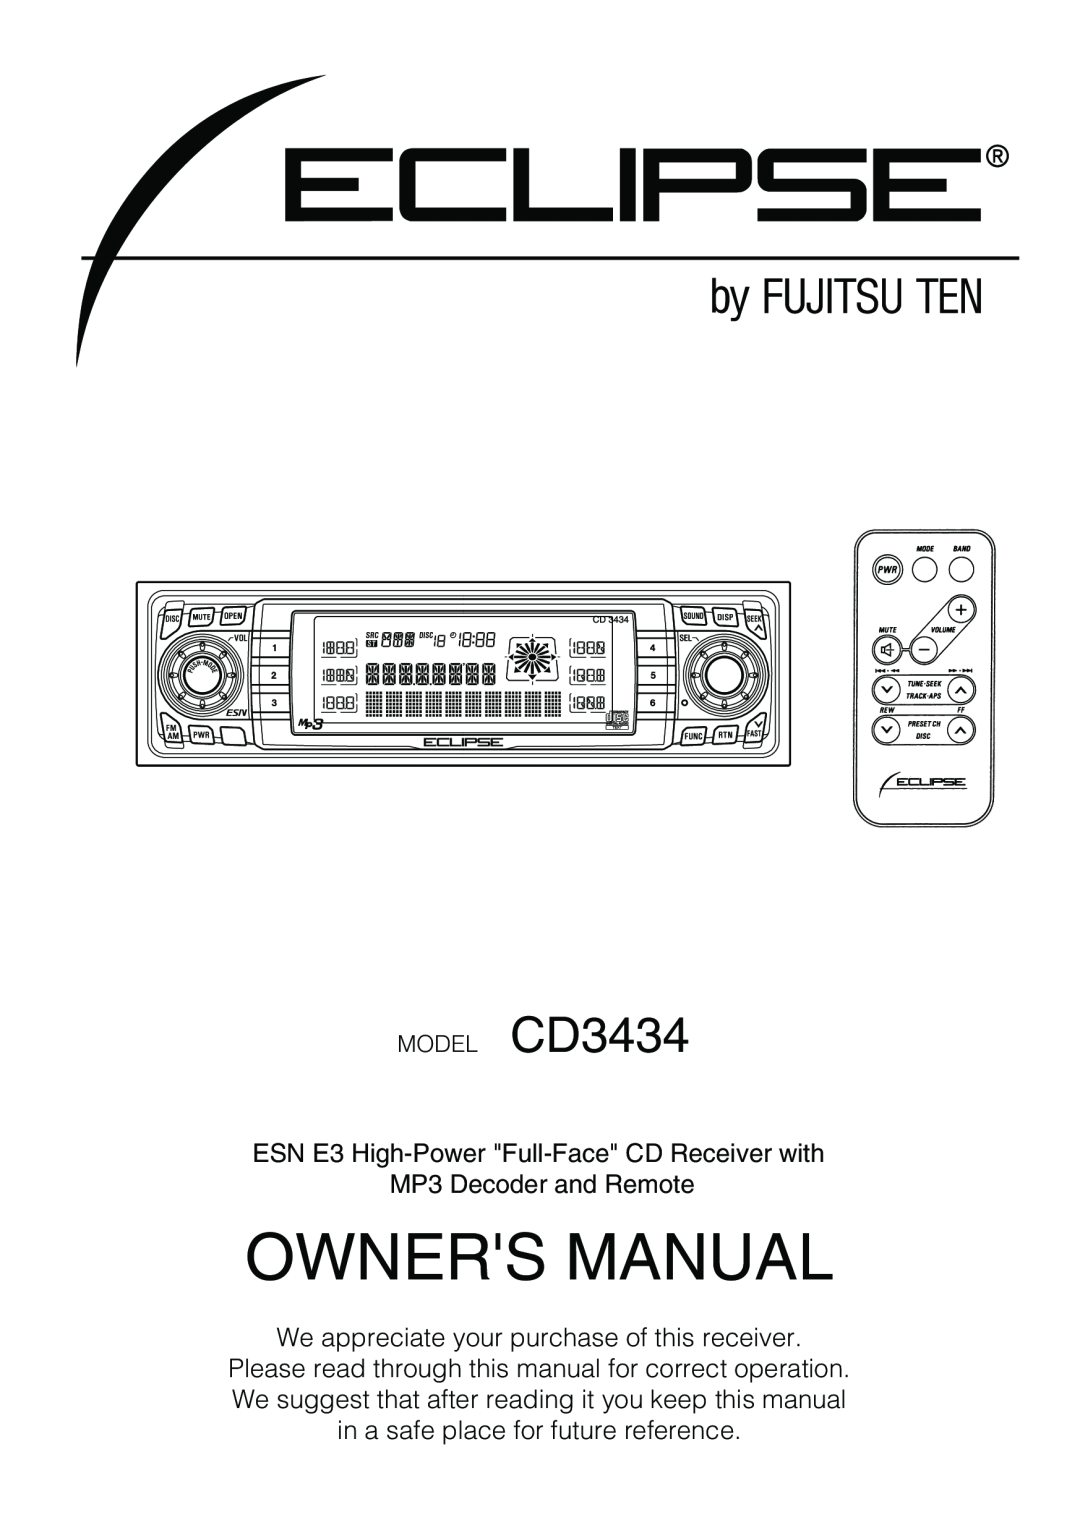 Eclipse - Fujitsu Ten CD3434 owner manual ESN E3 High-Power Full-Face CD Receiver with MP3 Decoder and Remote 